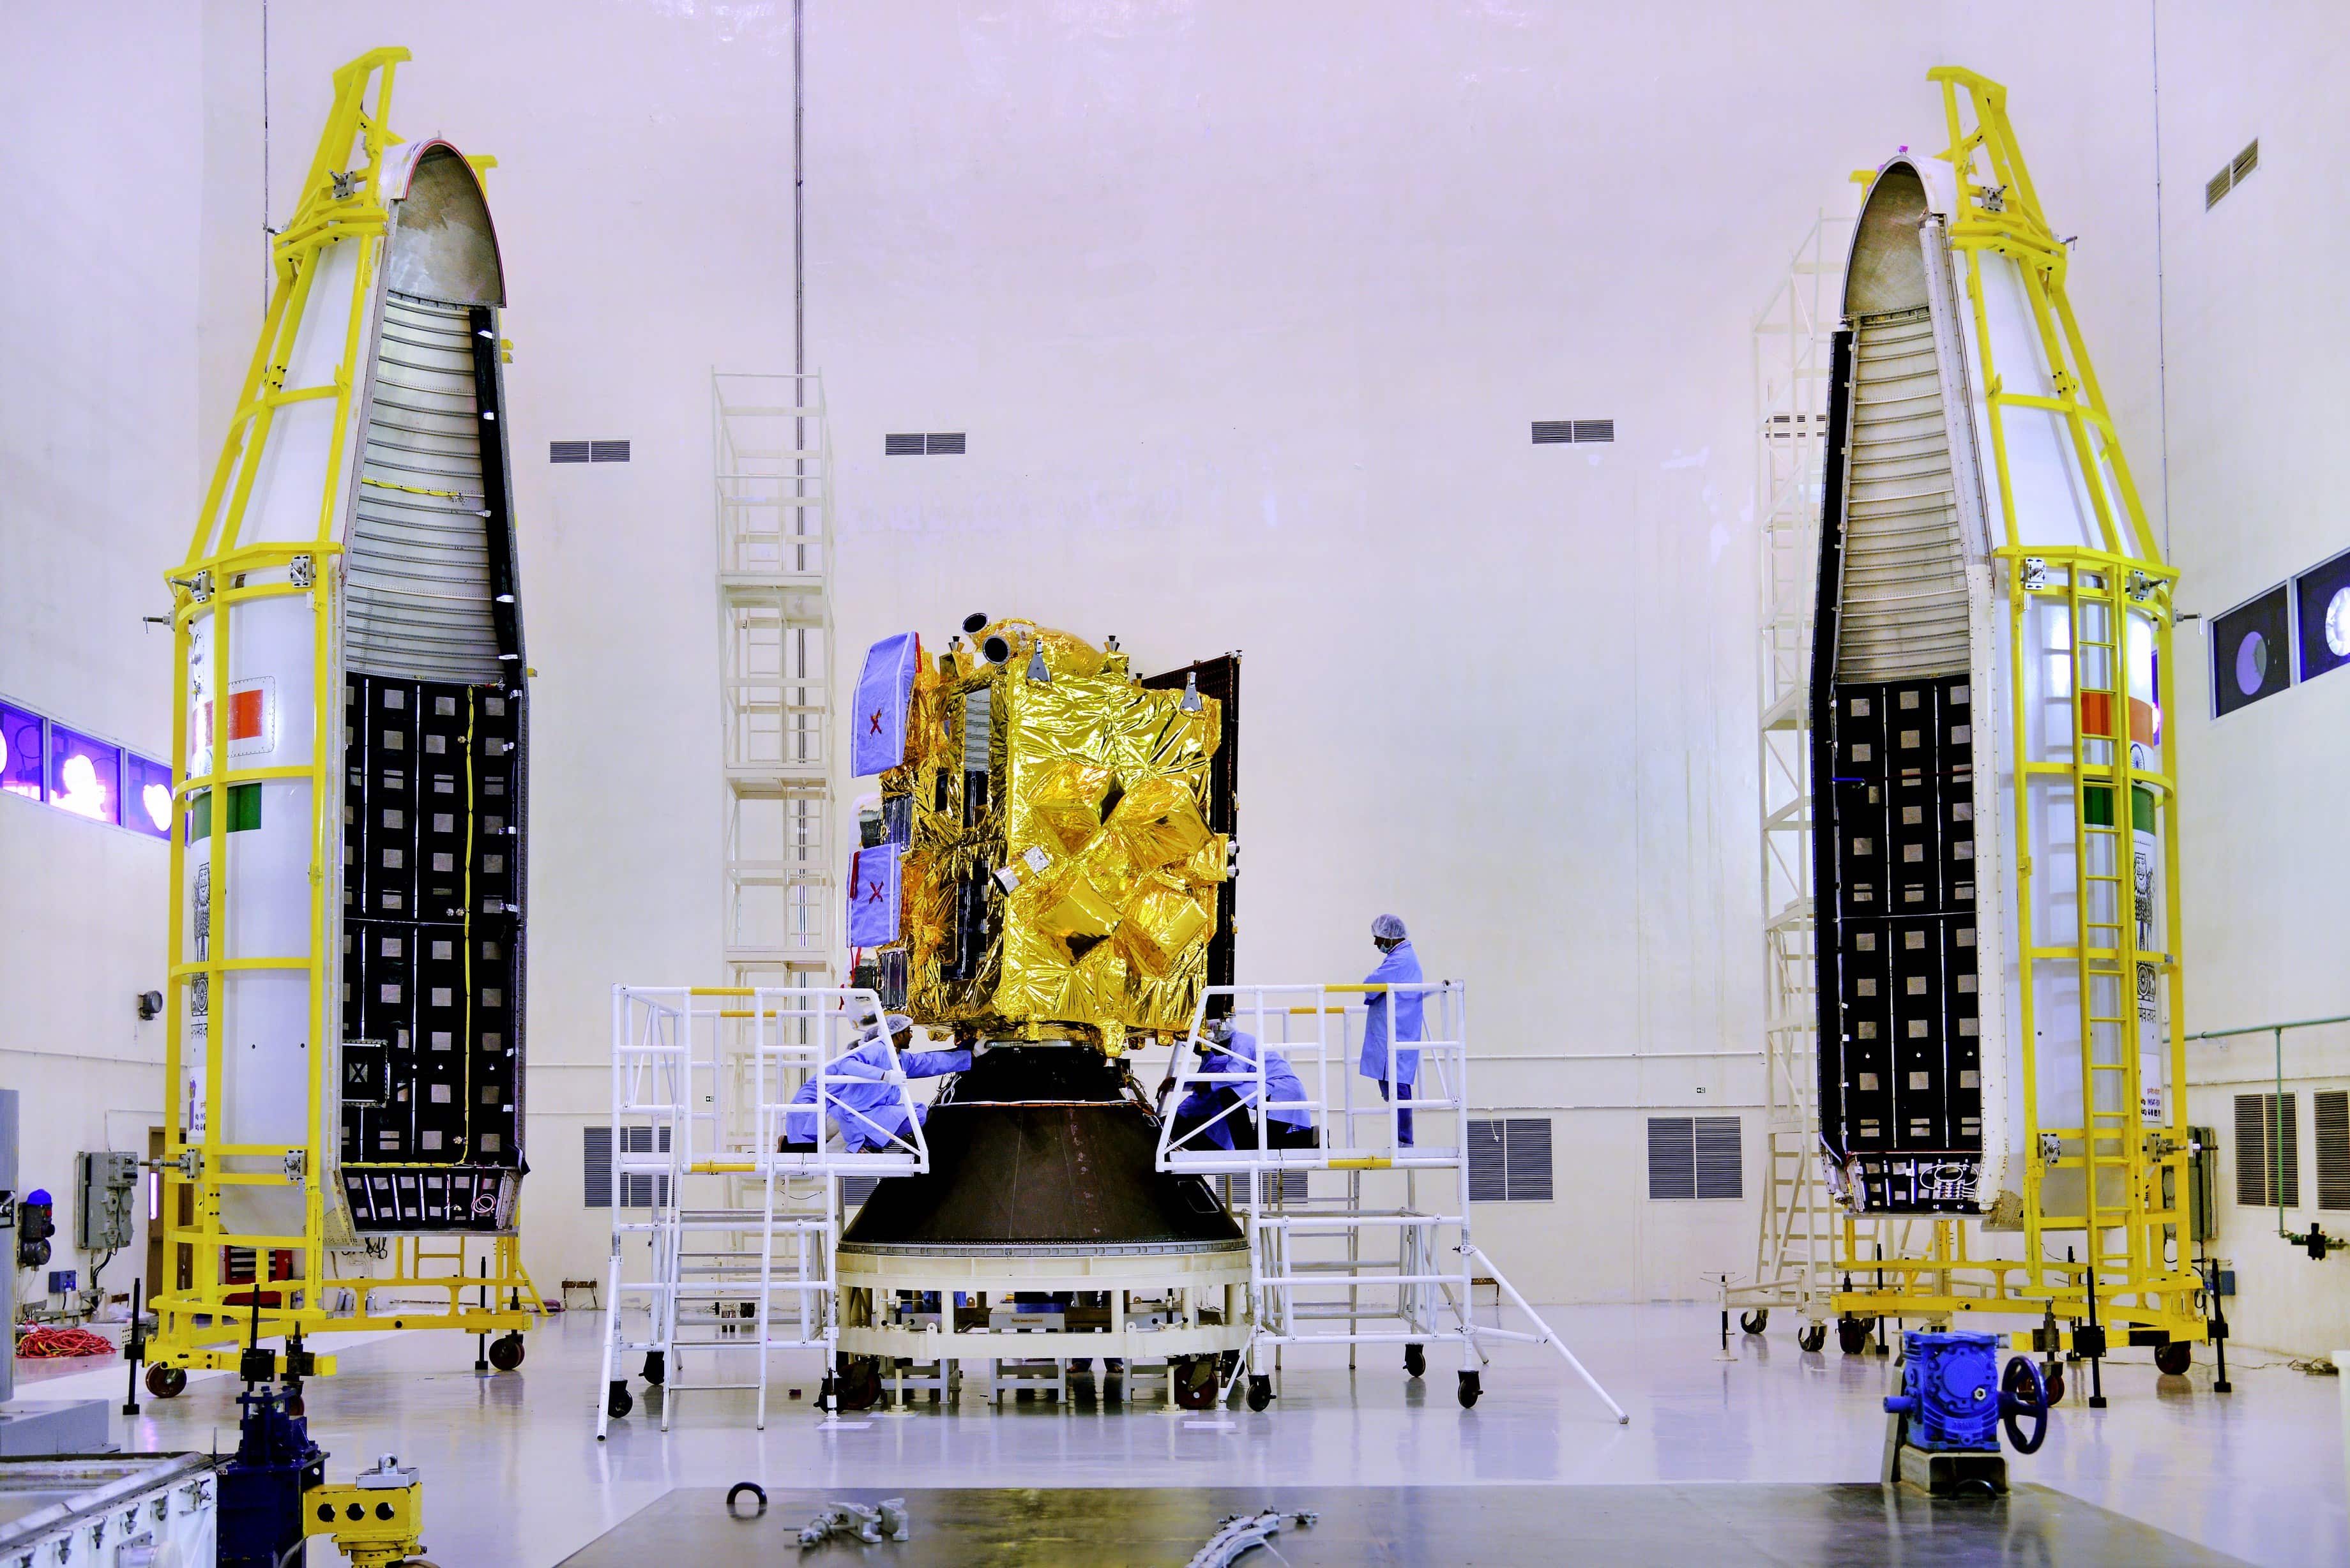 INSAT-3DR seen with two halves of payload faring of GSLV-F05. Photo: Official website